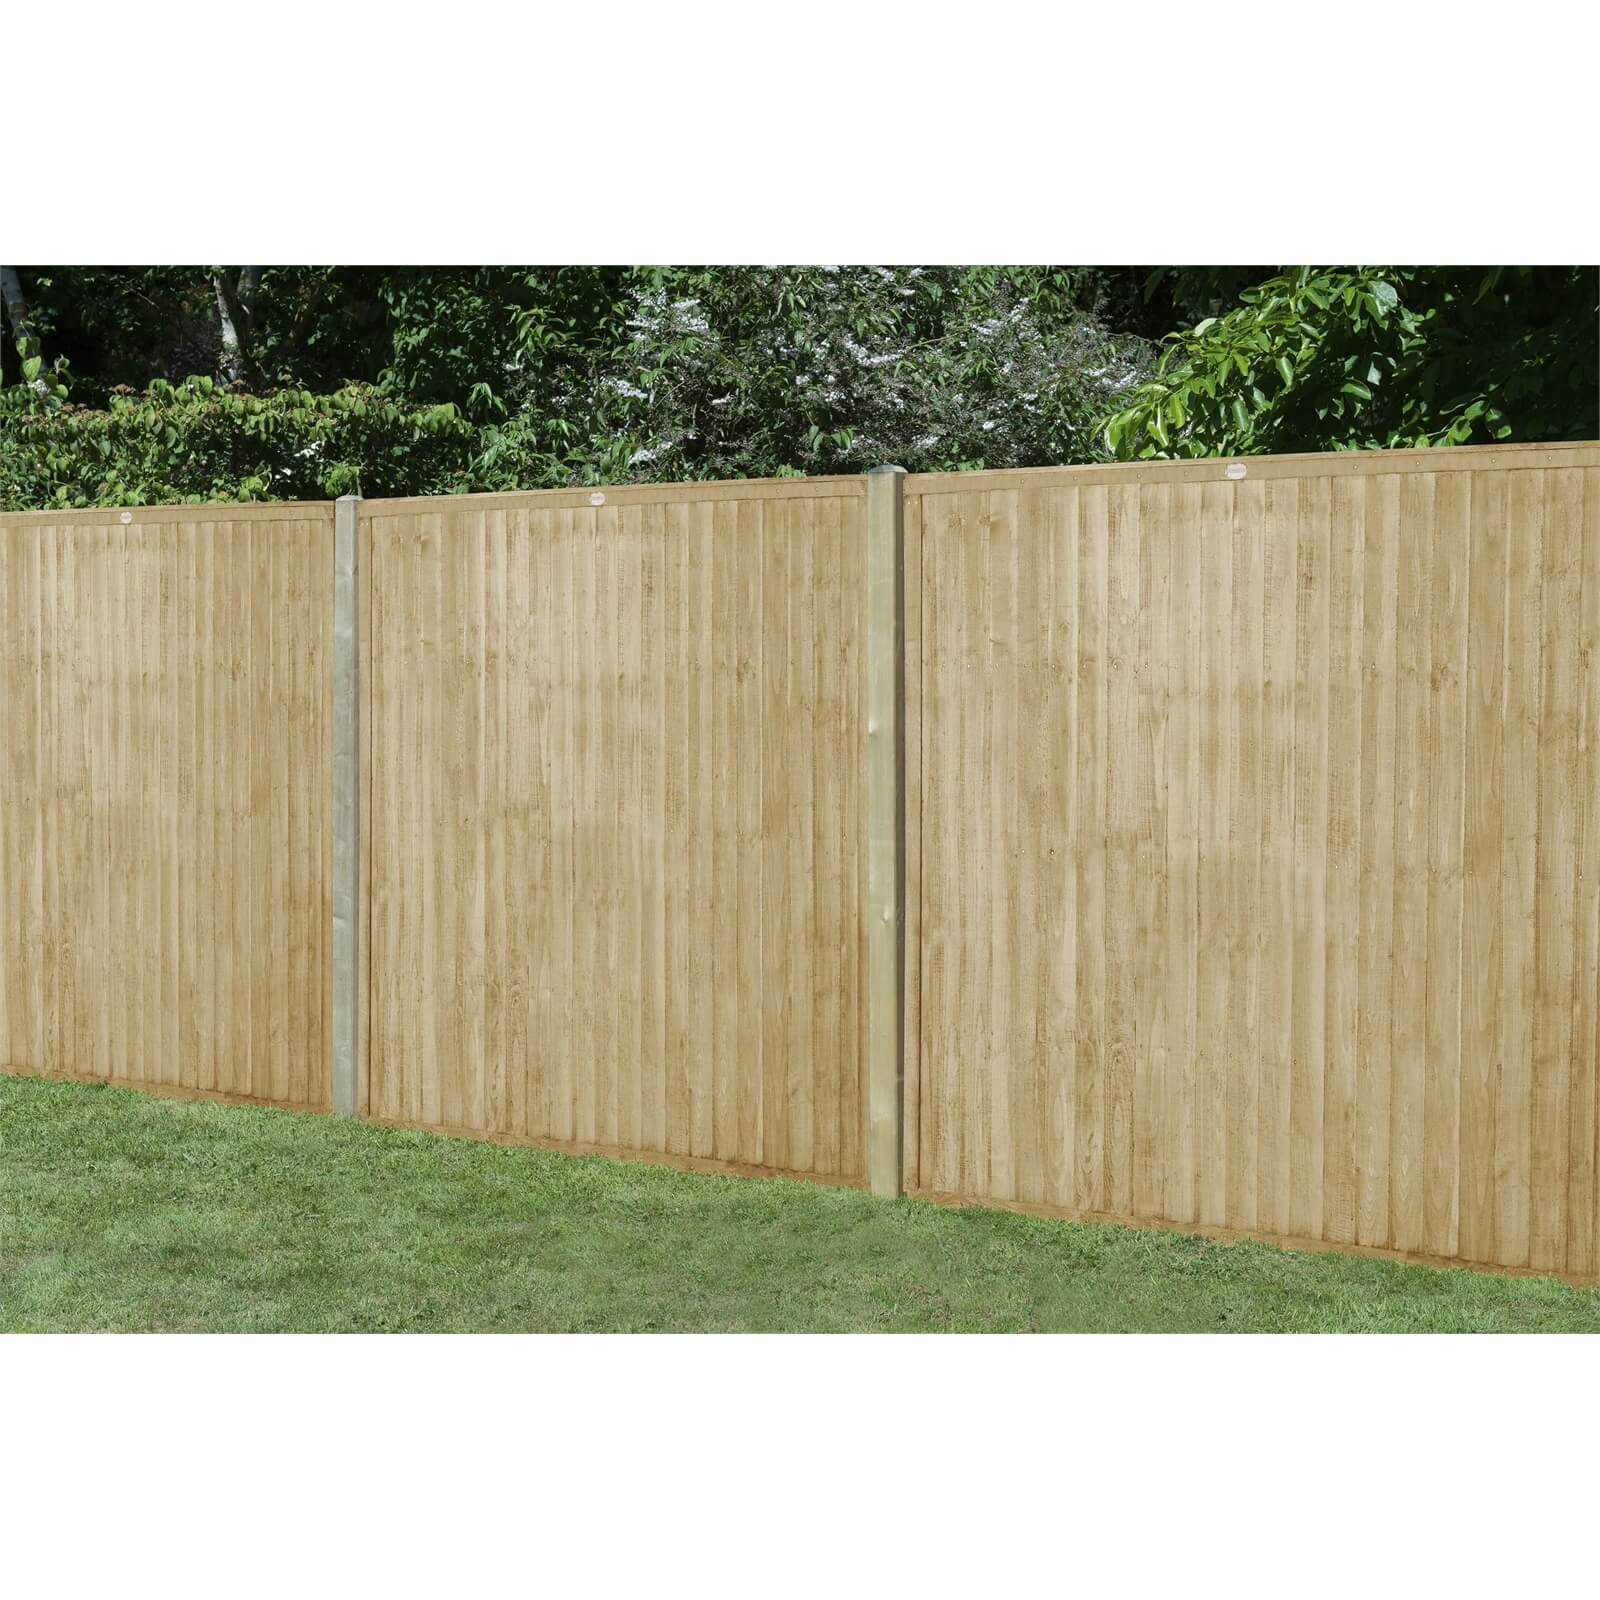 6ft x 5ft (1.83m x 1.52m) Pressure Treated Closeboard Fence Panel - Pack of 4